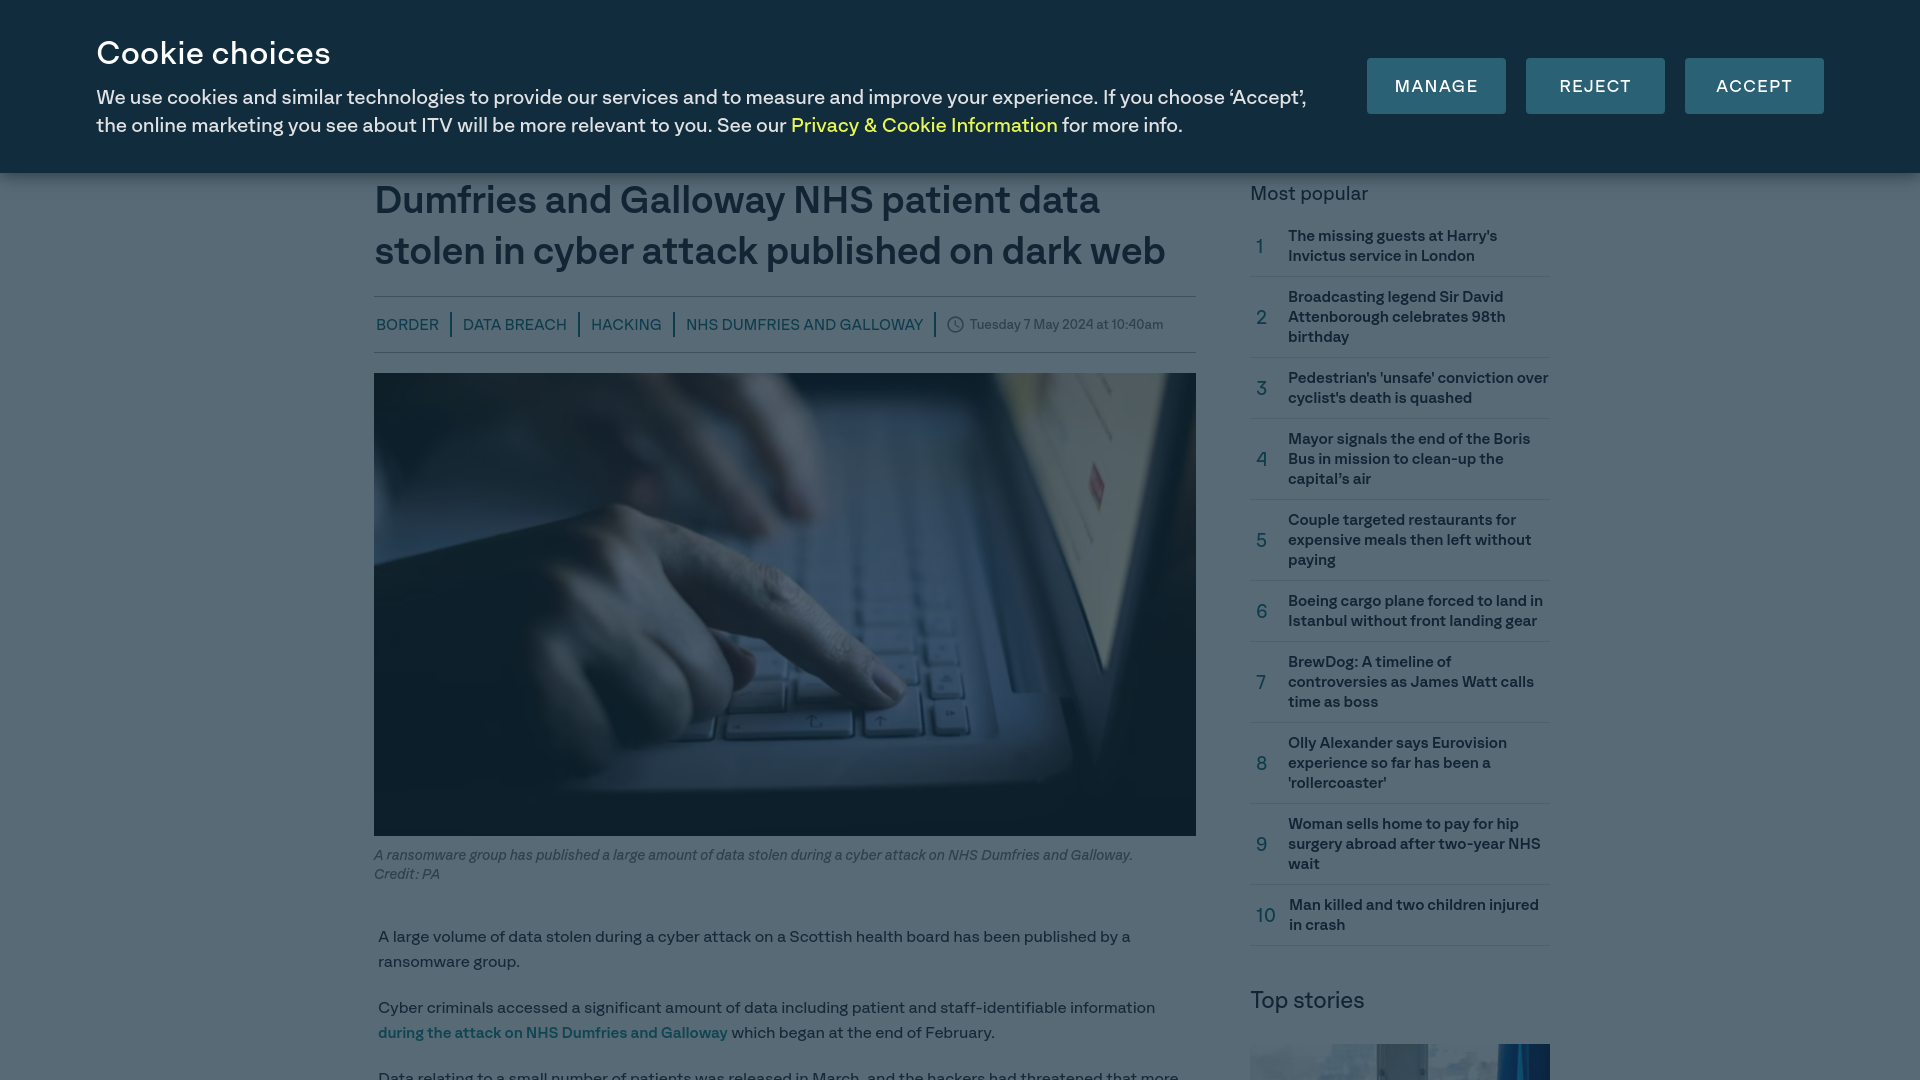 Dumfries and Galloway NHS patient data stolen in cyber attack published on dark web | ITV News Border